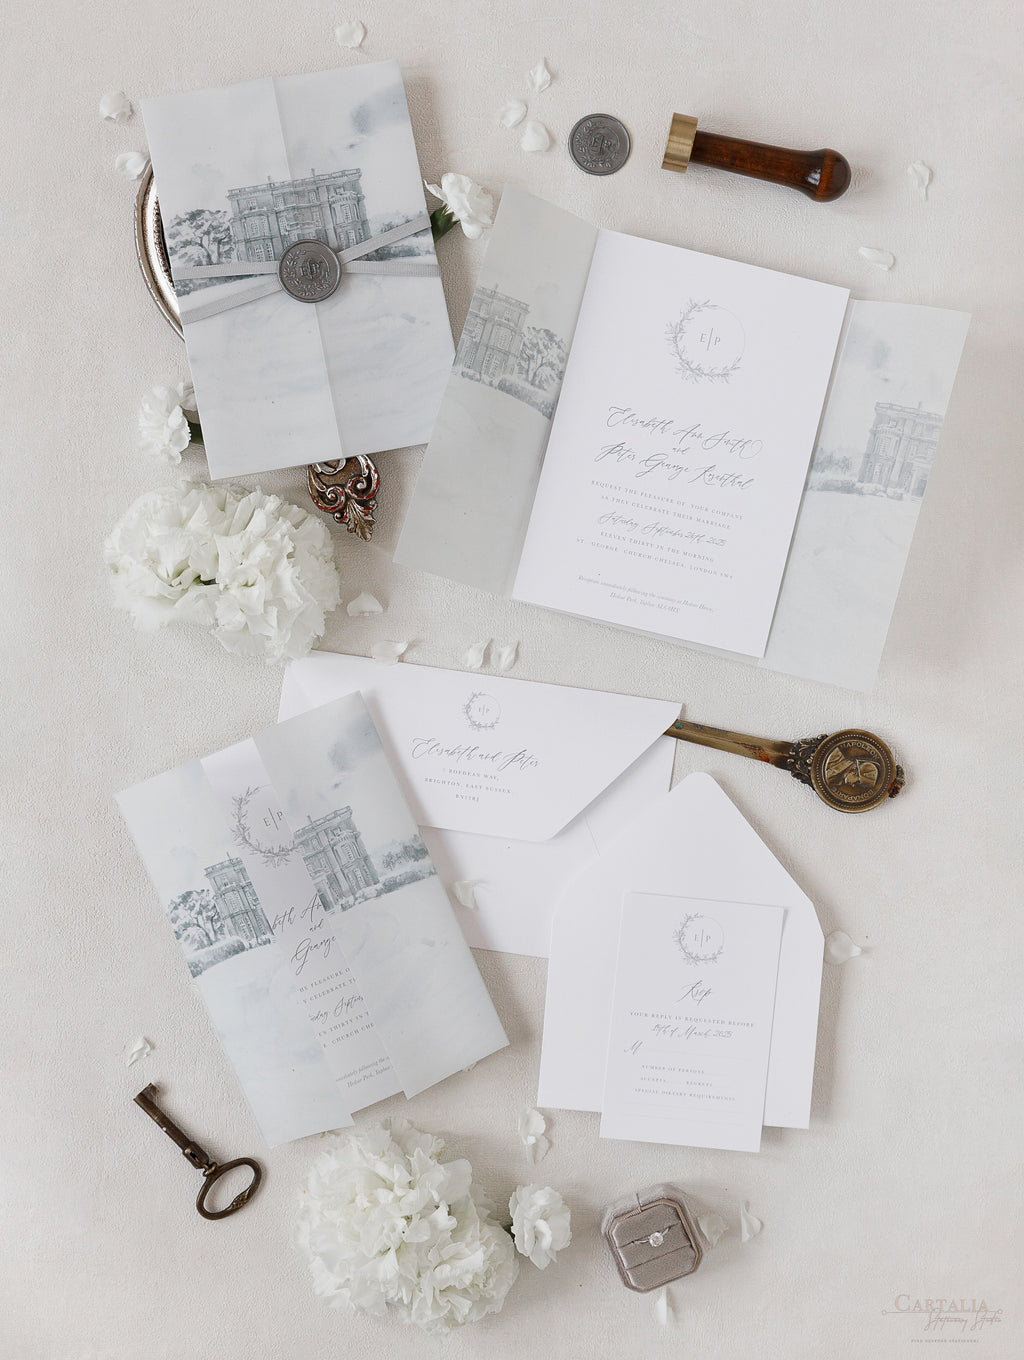 HEDSOR HOUSE  Your Venue invitation on Vellum with Wax Seal